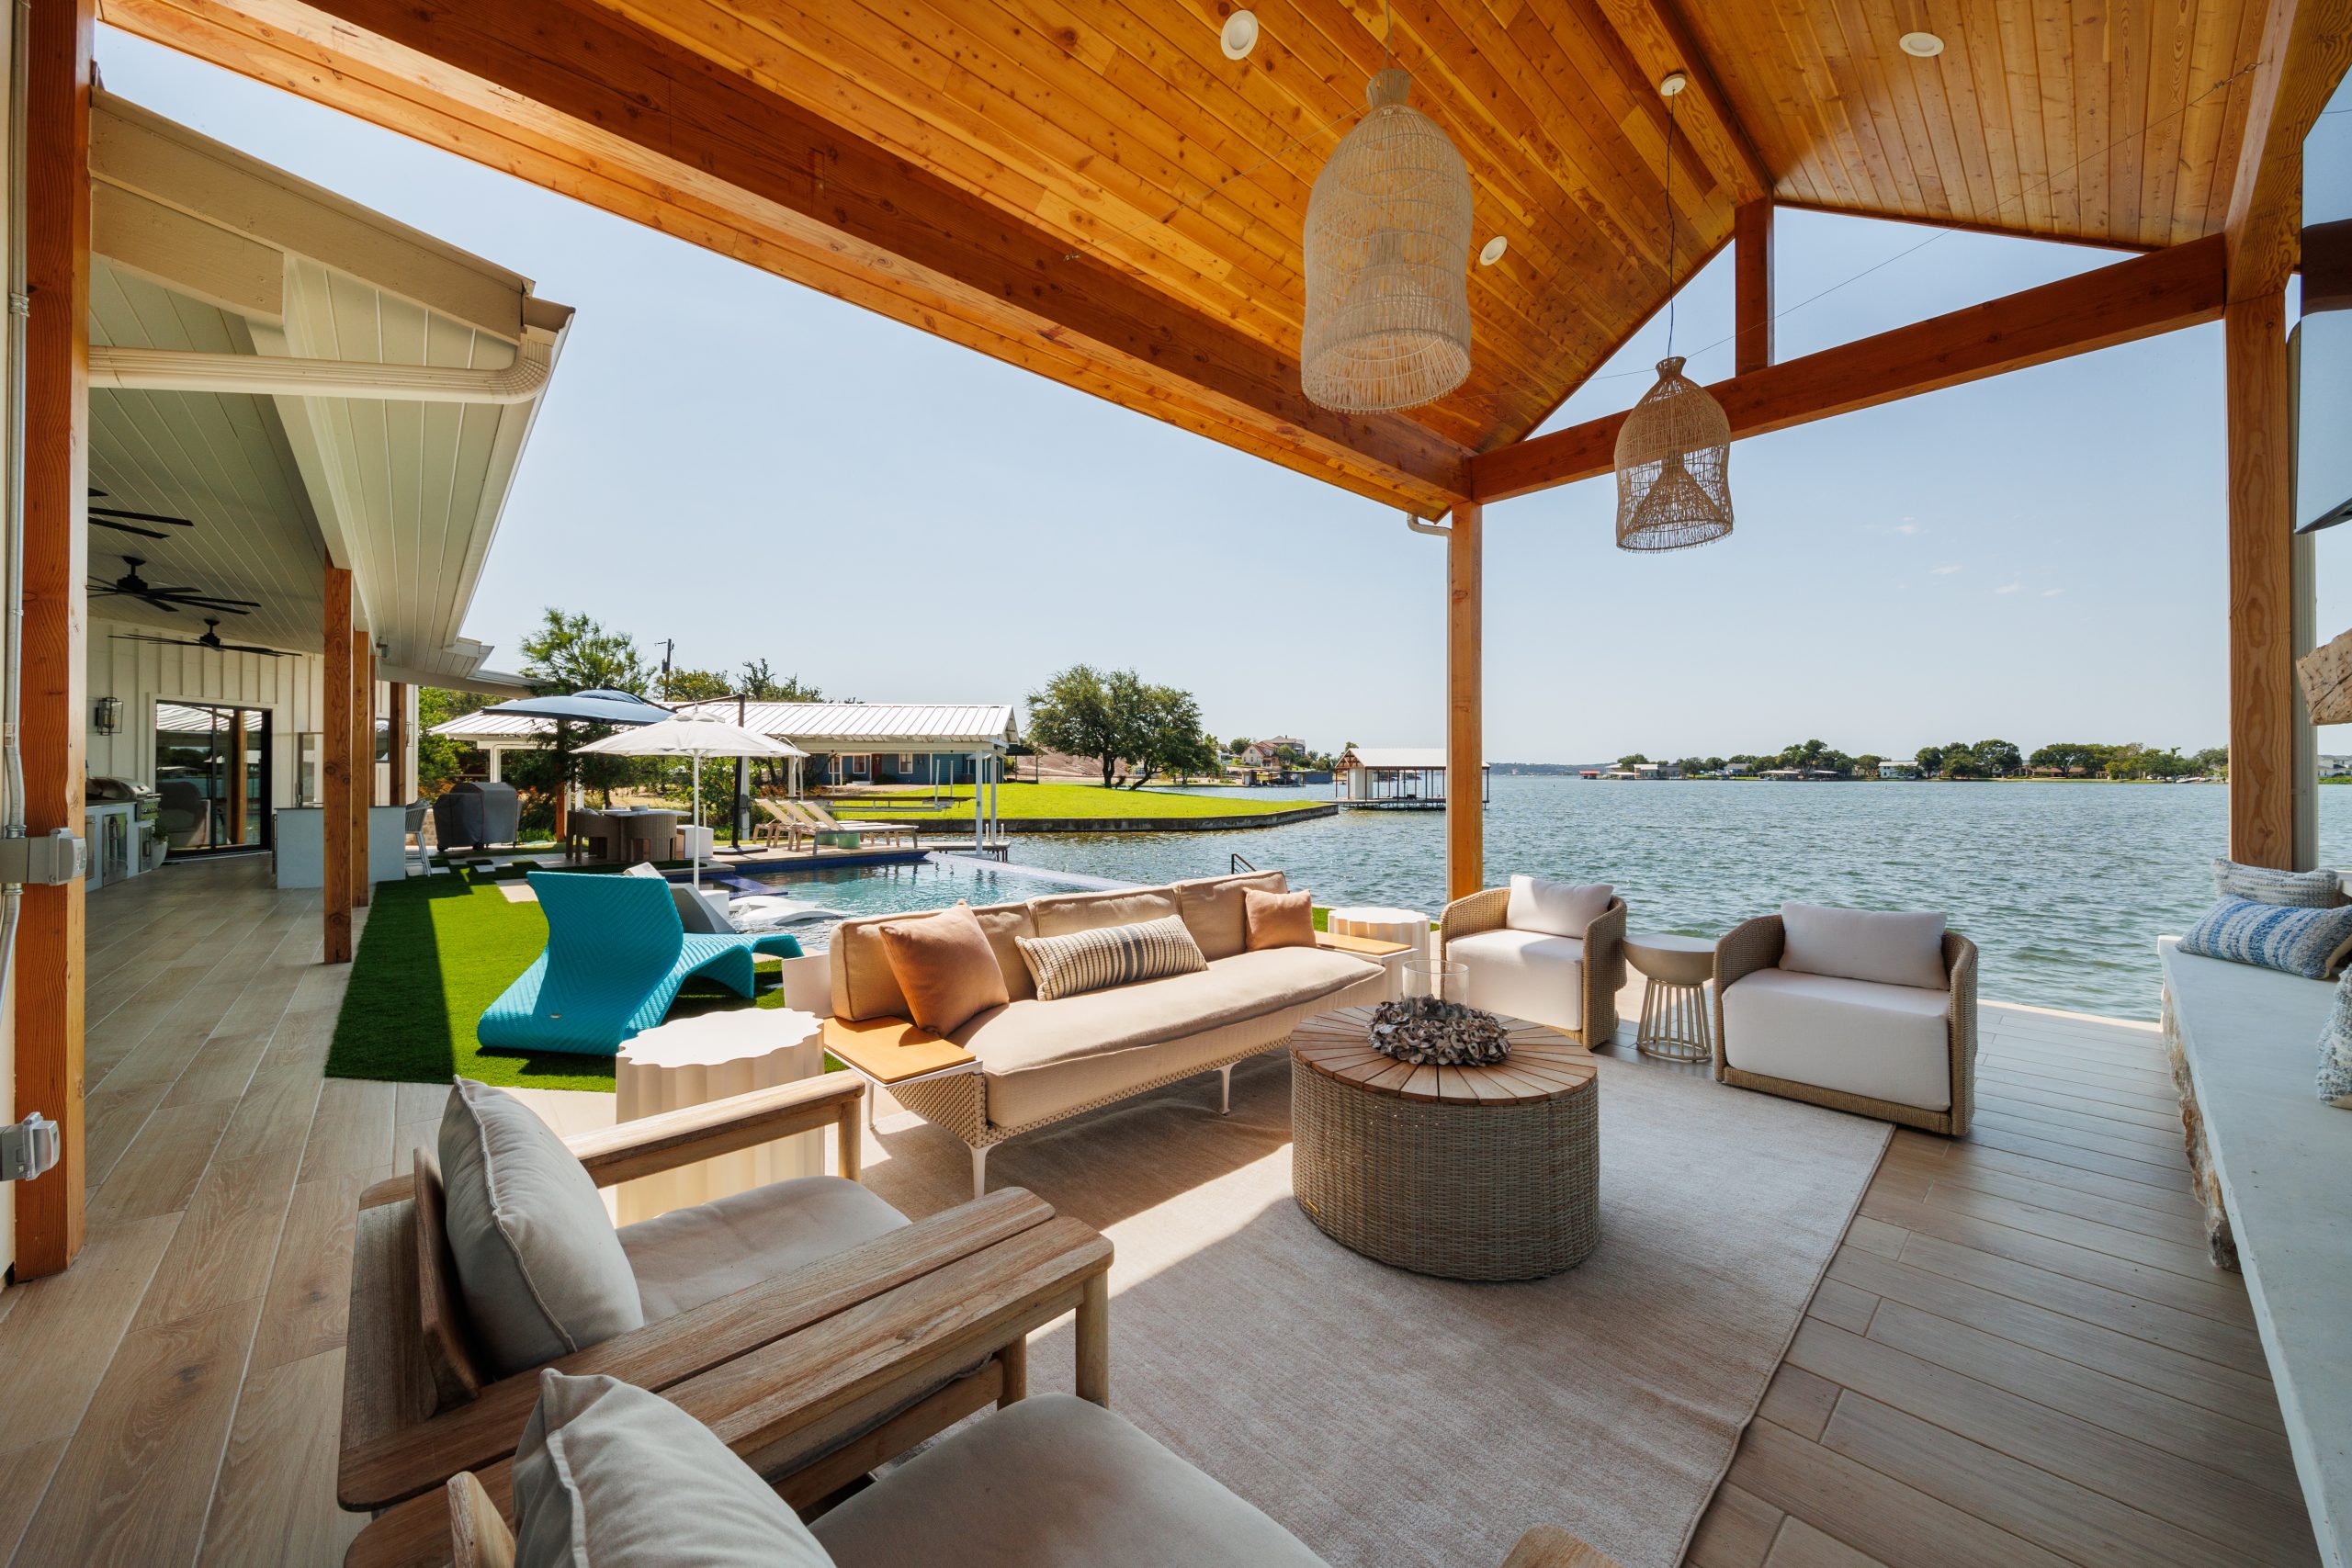 Lakeside Retreat - image of a shaded living space on a deck overlooking lake views